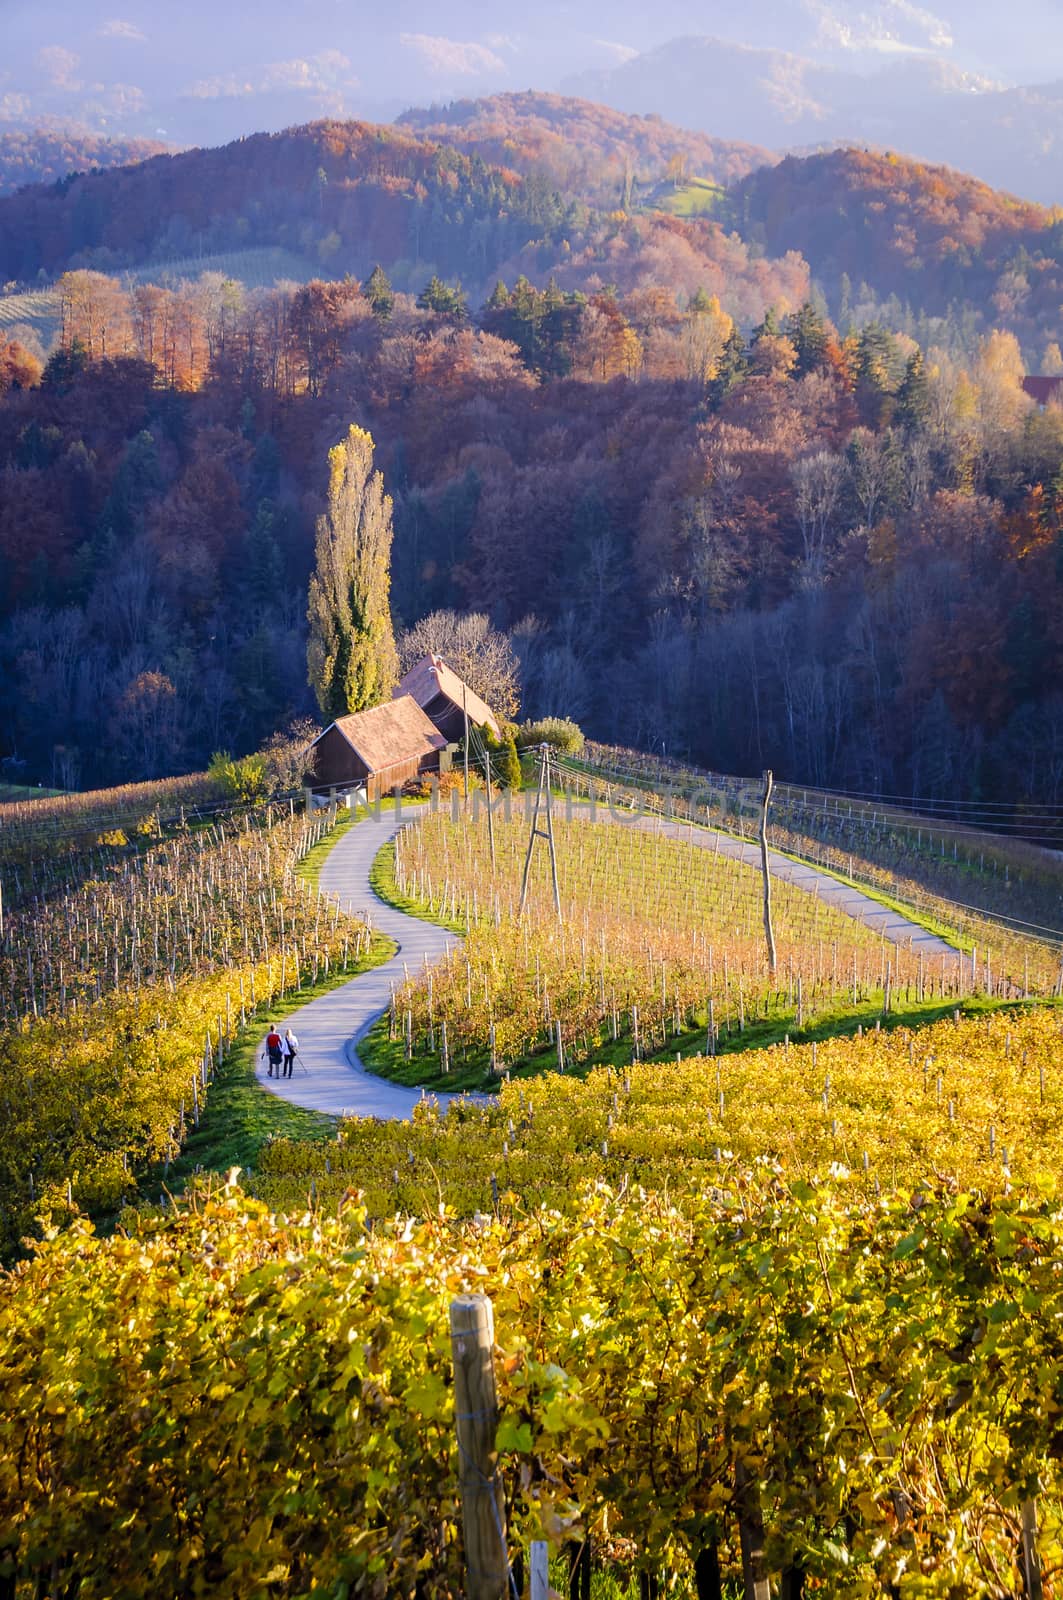 Heart of Slovenia, a natural heart form, shaped by a hill a heart appears in the midst of vineyards. A couple facing away from viewer is walking down the road holding hands